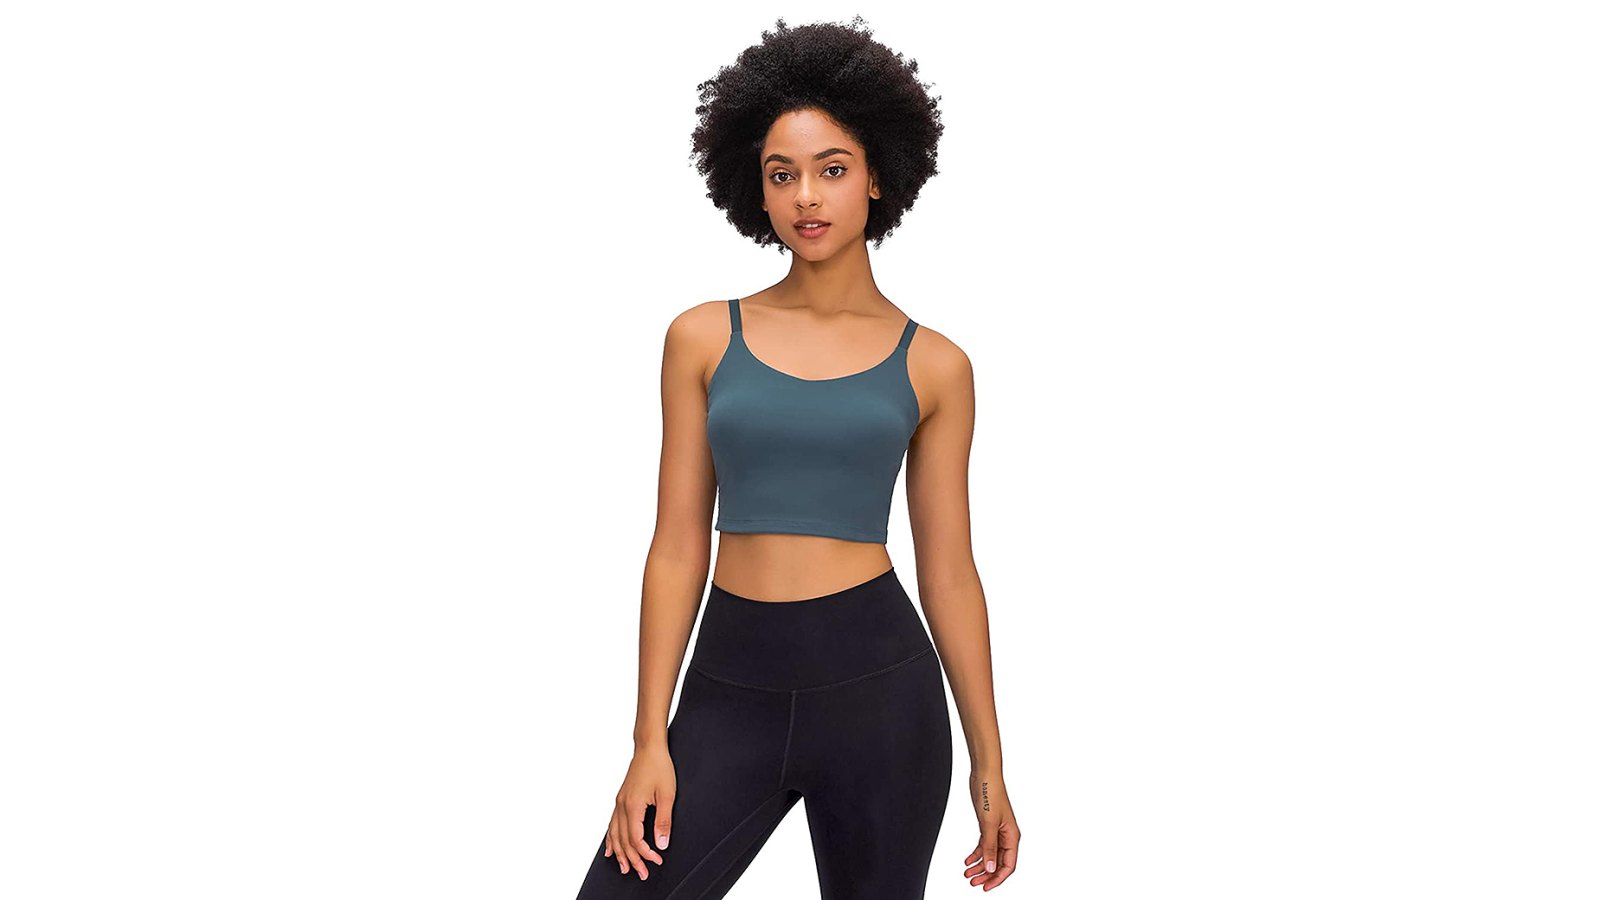 Lavento Bra Top Can Be Worn With Anything From Jeans to Joggers